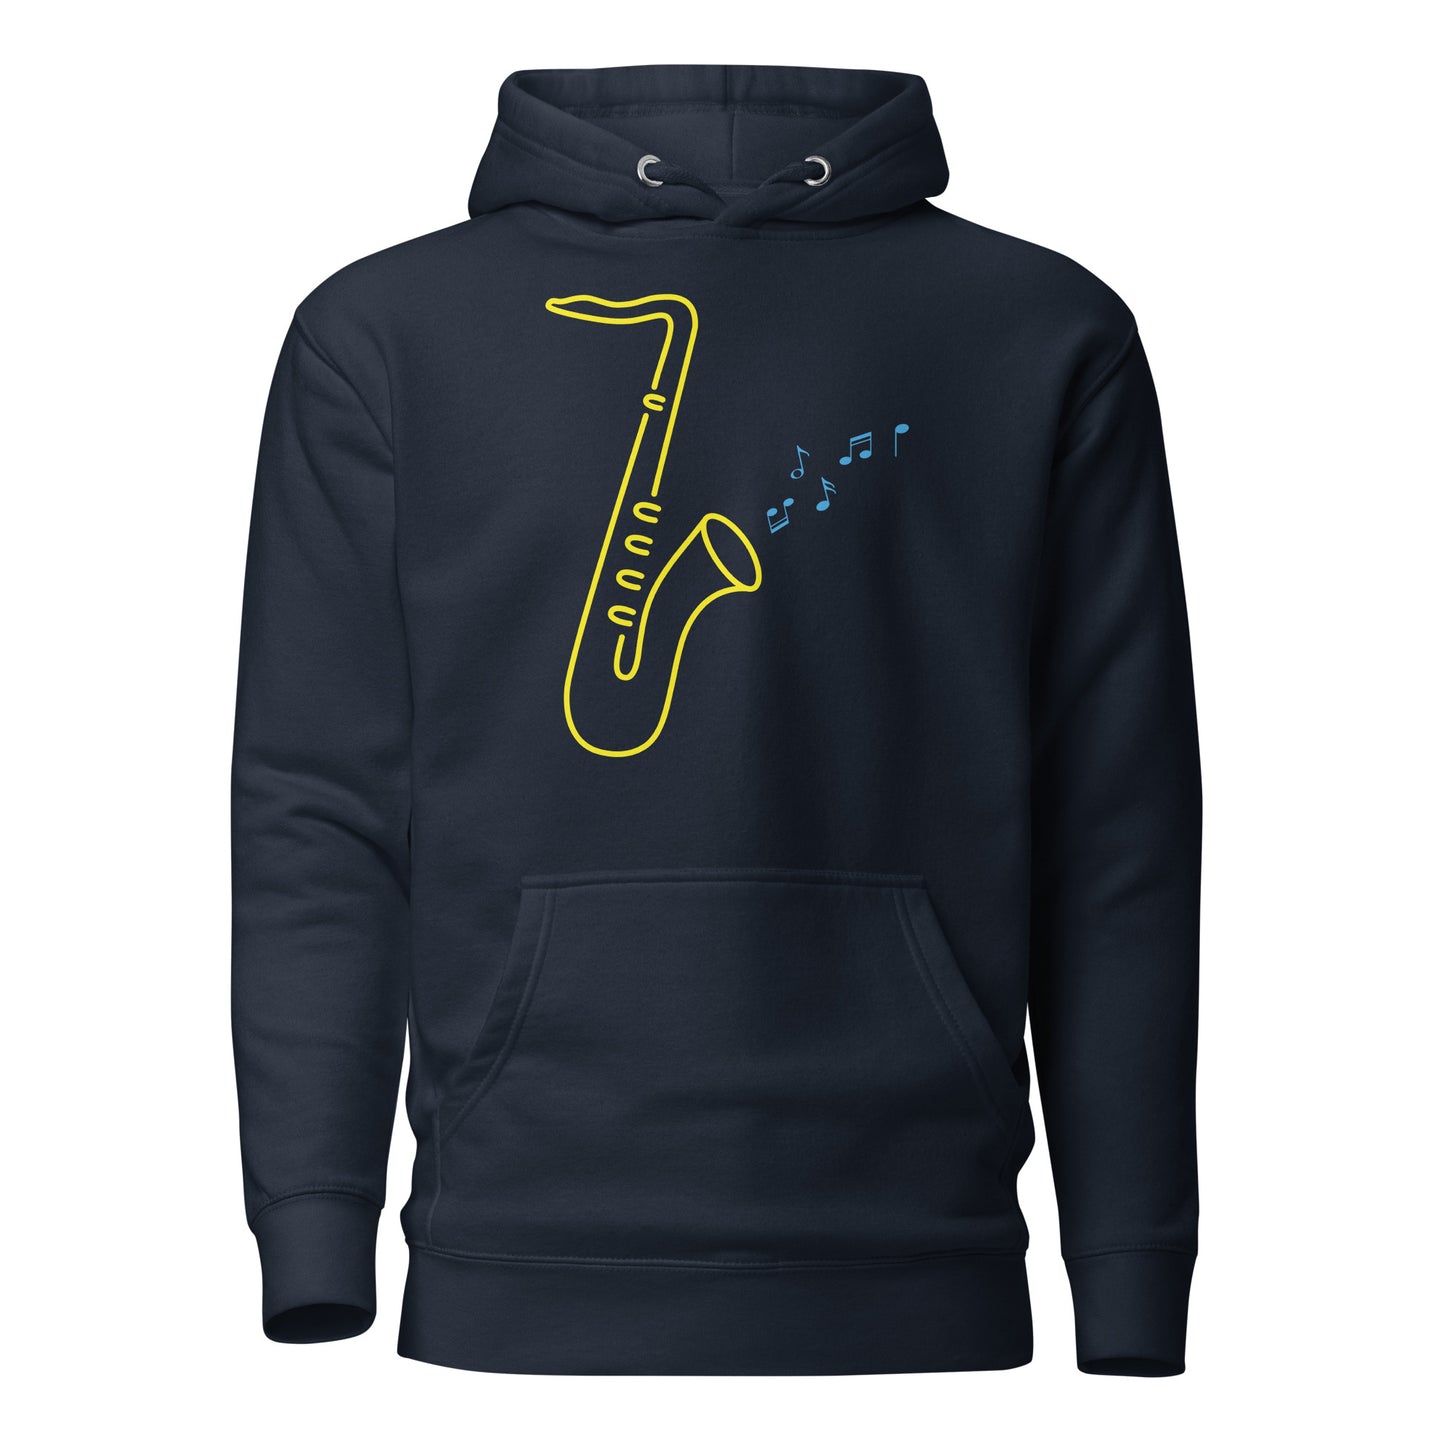 Navy blue Hoodie with a vibrant neon design of a yellow saxophone and blue musical notes, from the TEQNEON Music Box collection